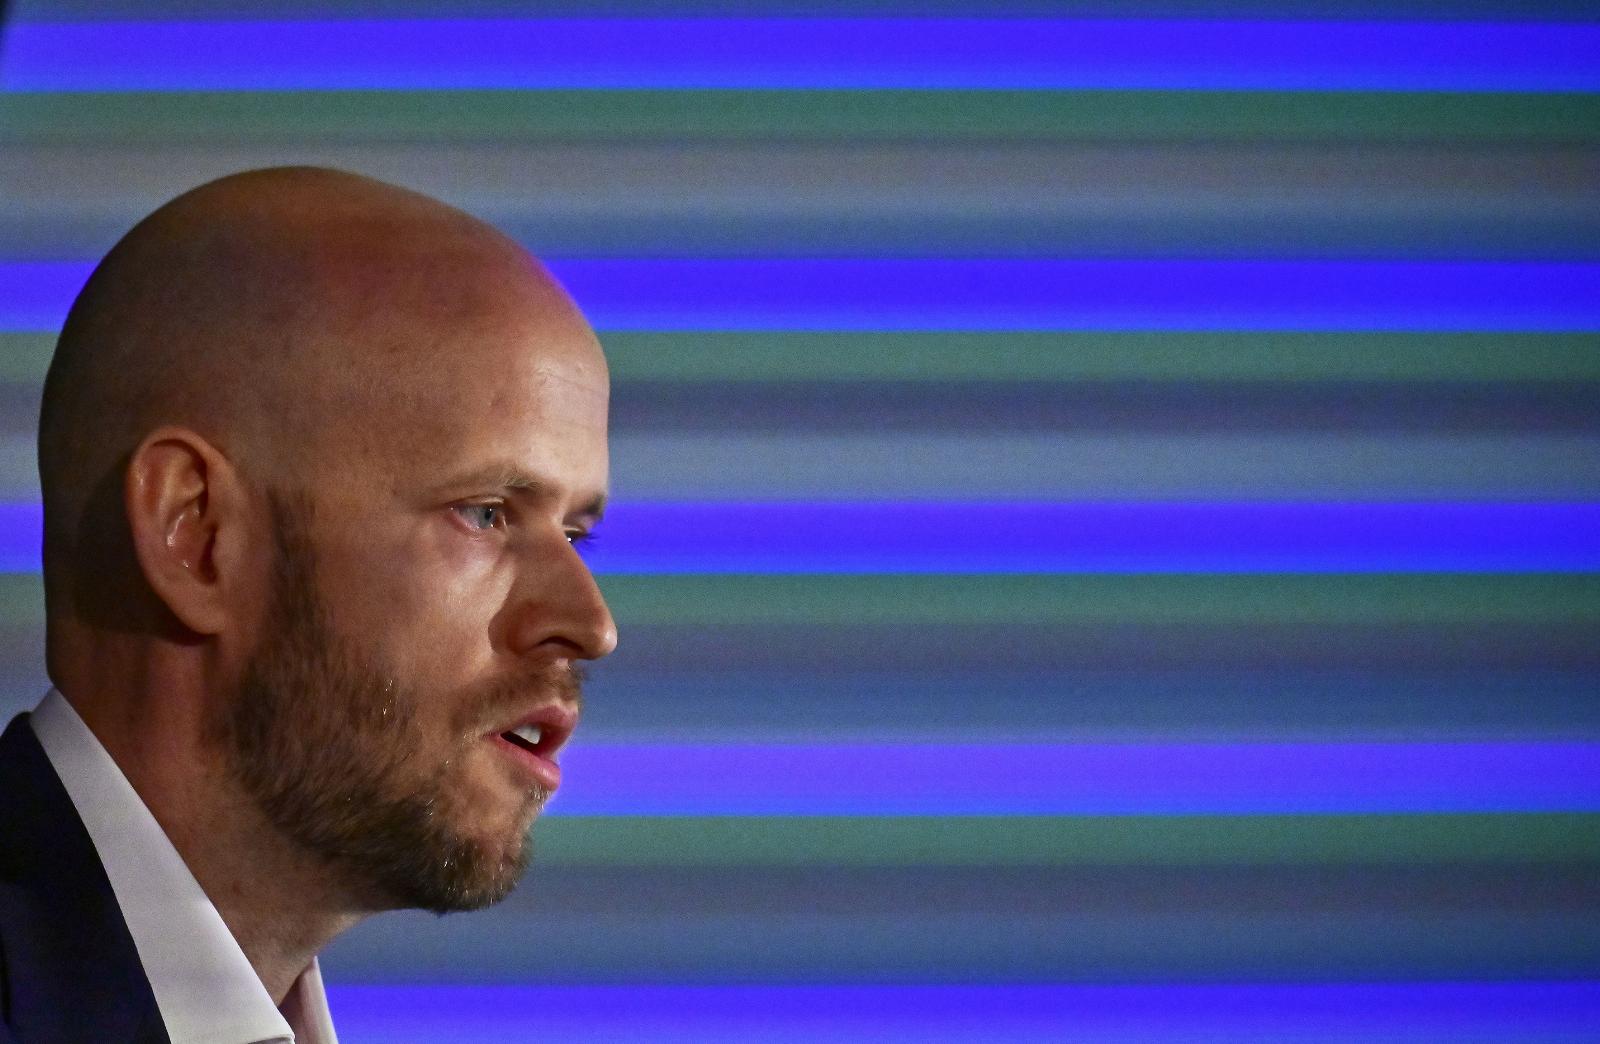 Spotify CEO Daniel Ek tells investors Apple’s DMA rules are a ‘farce,’ but says there are ‘future upsides’ too